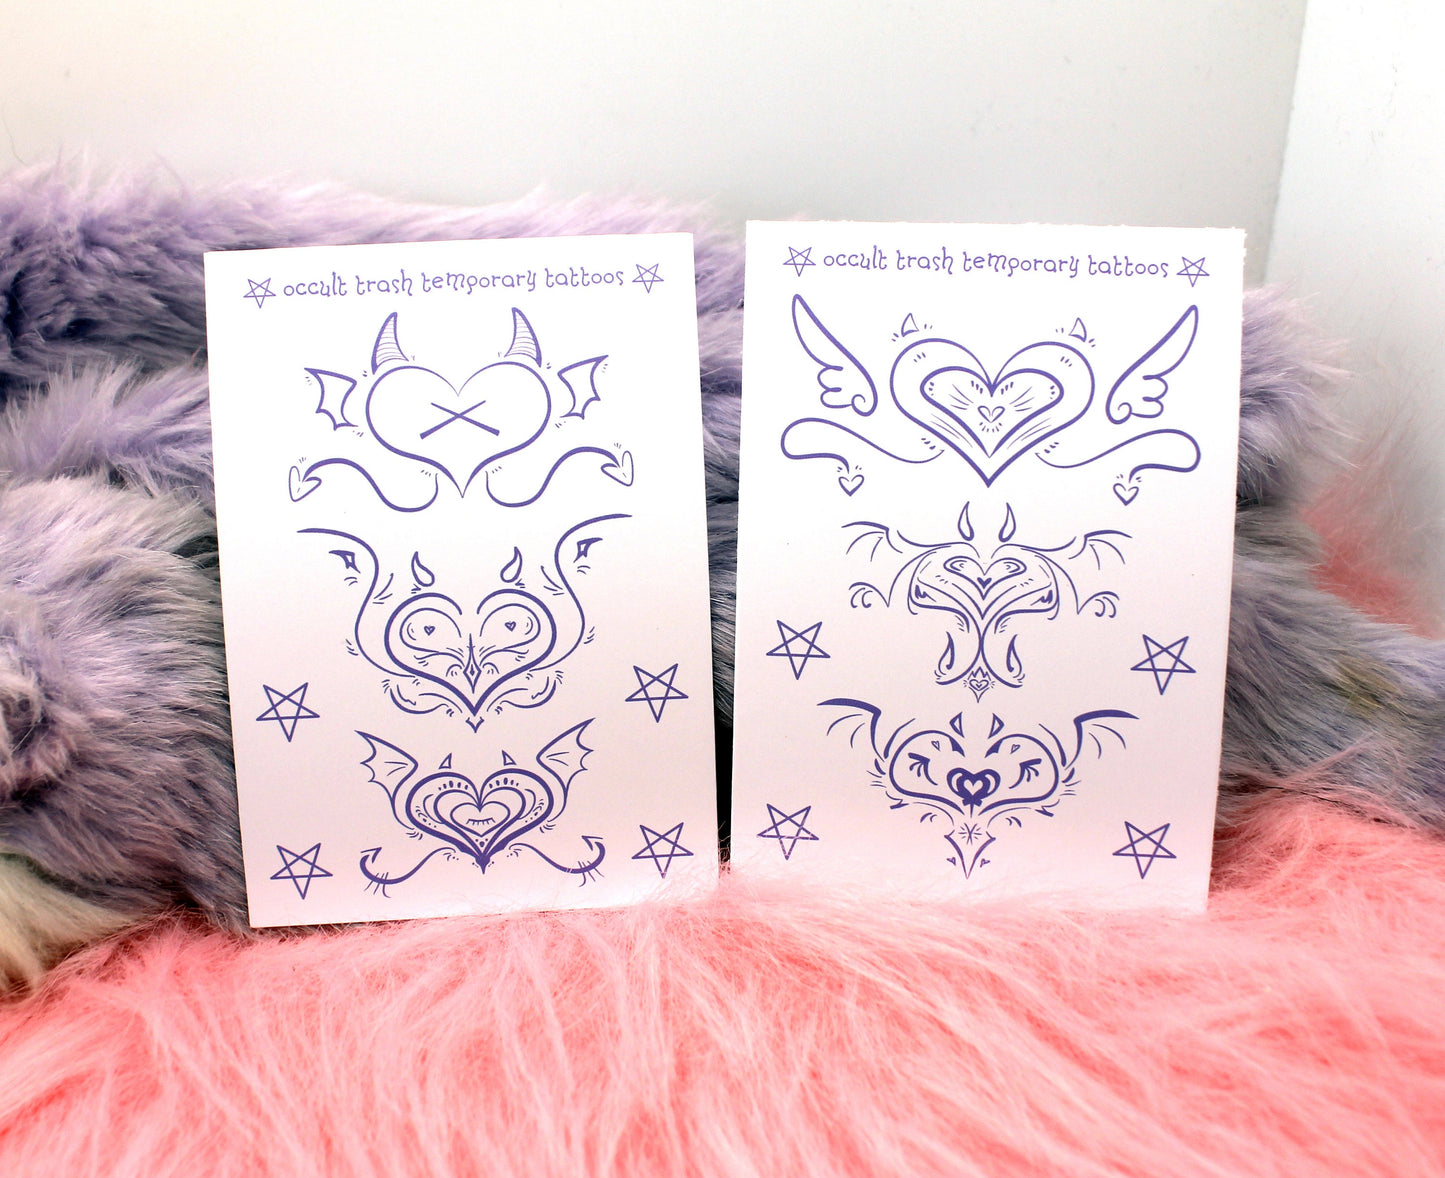 Succubi/boi Sigil Temporary Tattoos Sheet A (Black, Pink, Purple & Red Available)